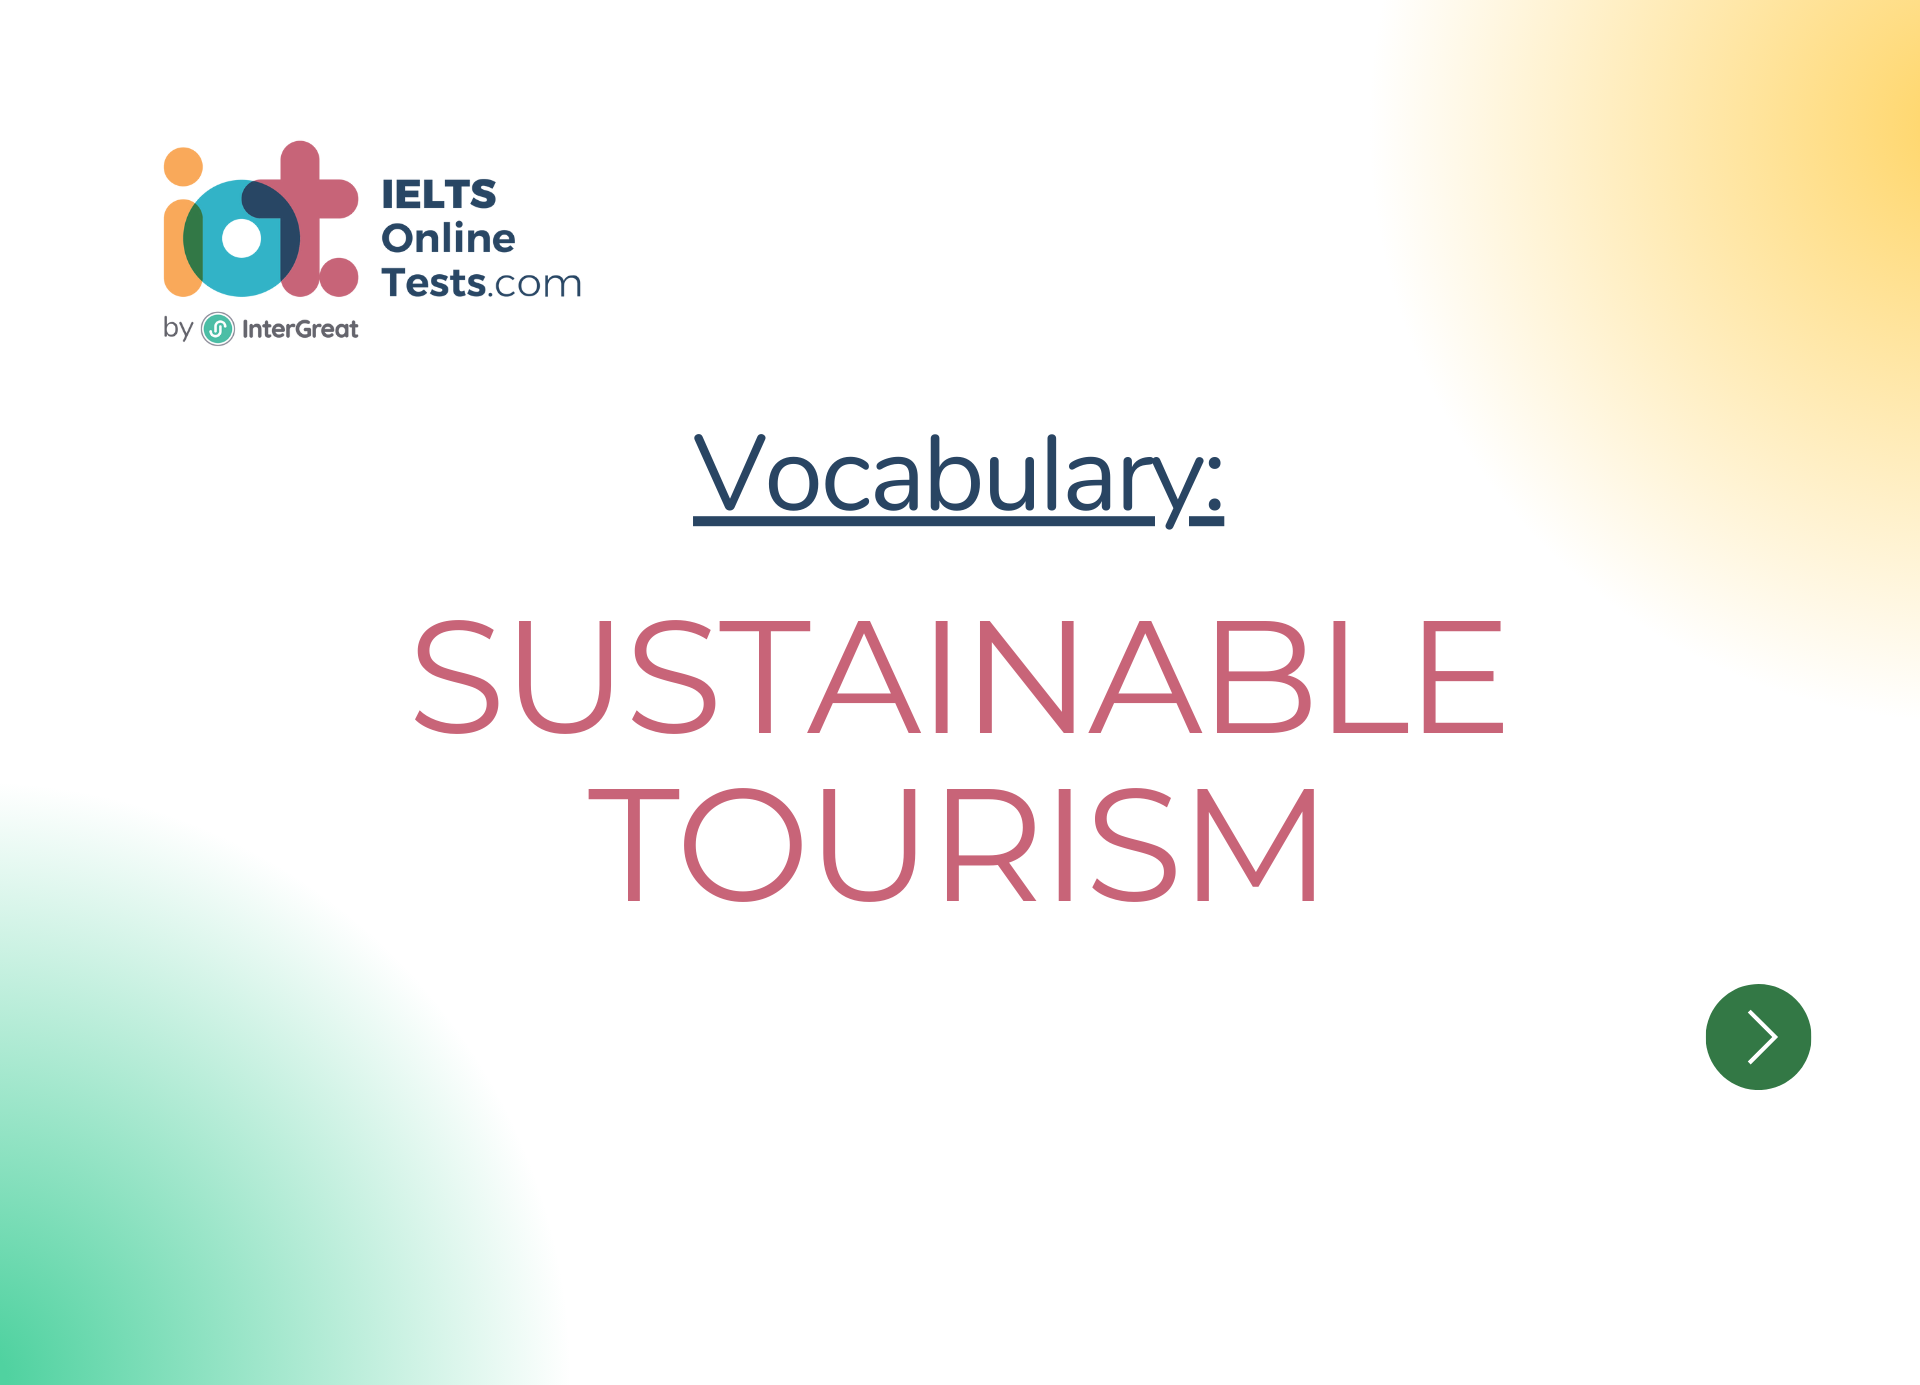 Du lịch bền vững (Sustainable tourism)